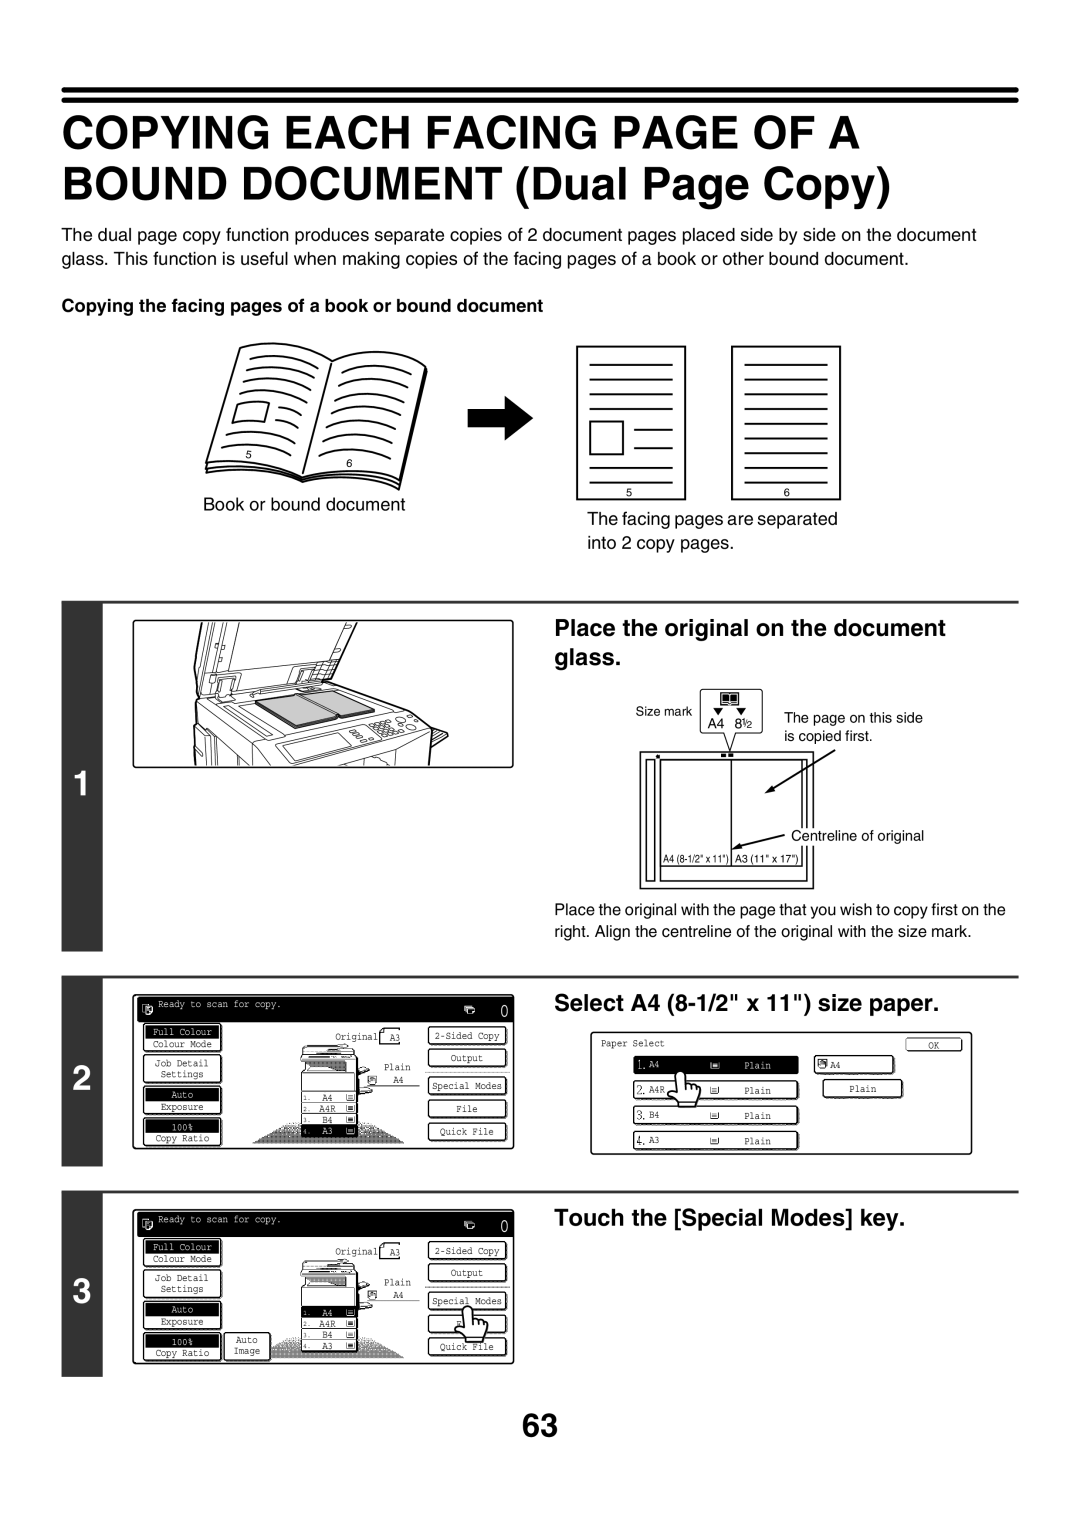 Sharp MX-4501N COPYING EACH FACING PAGE OF A BOUND DOCUMENT Dual Page Copy, Place the original on the document glass, Auto 